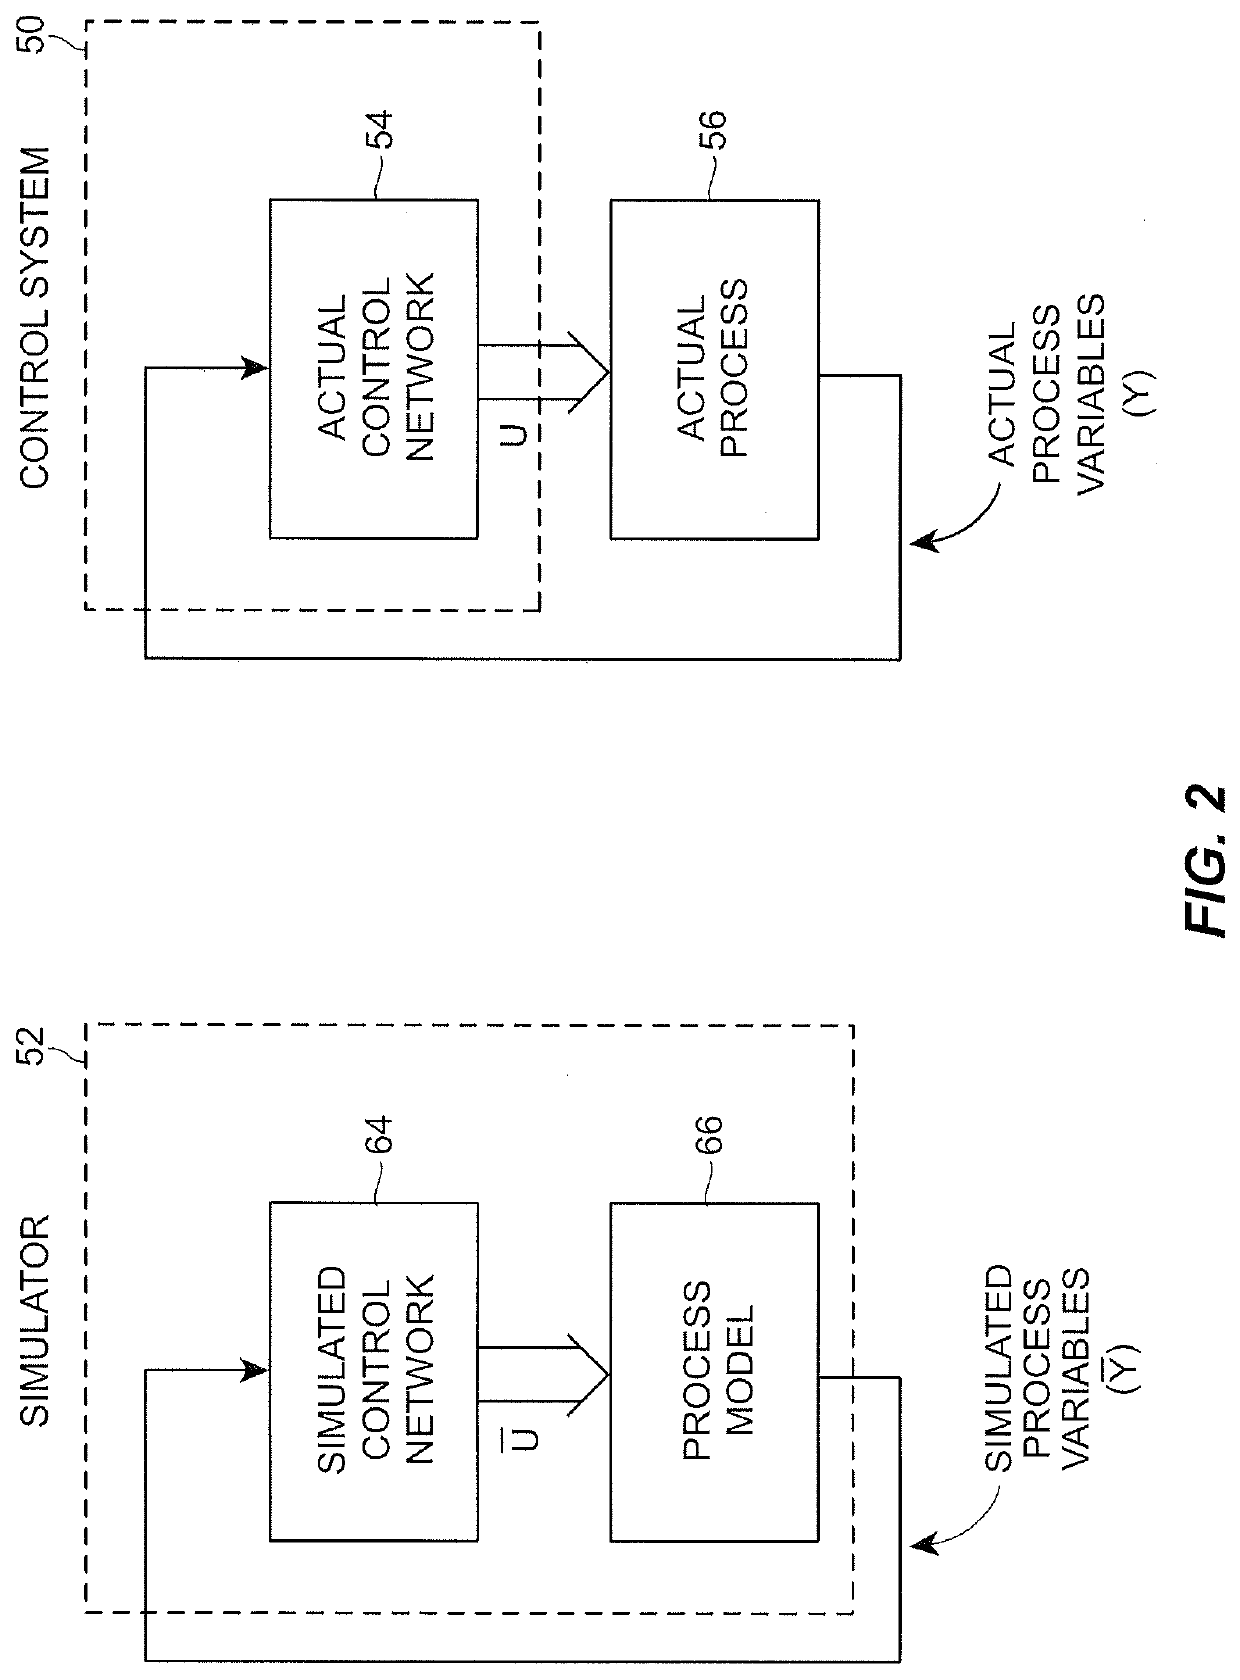 Real-Time Control Using Directed Predictive Simulation Within a Control System of a Process Plant